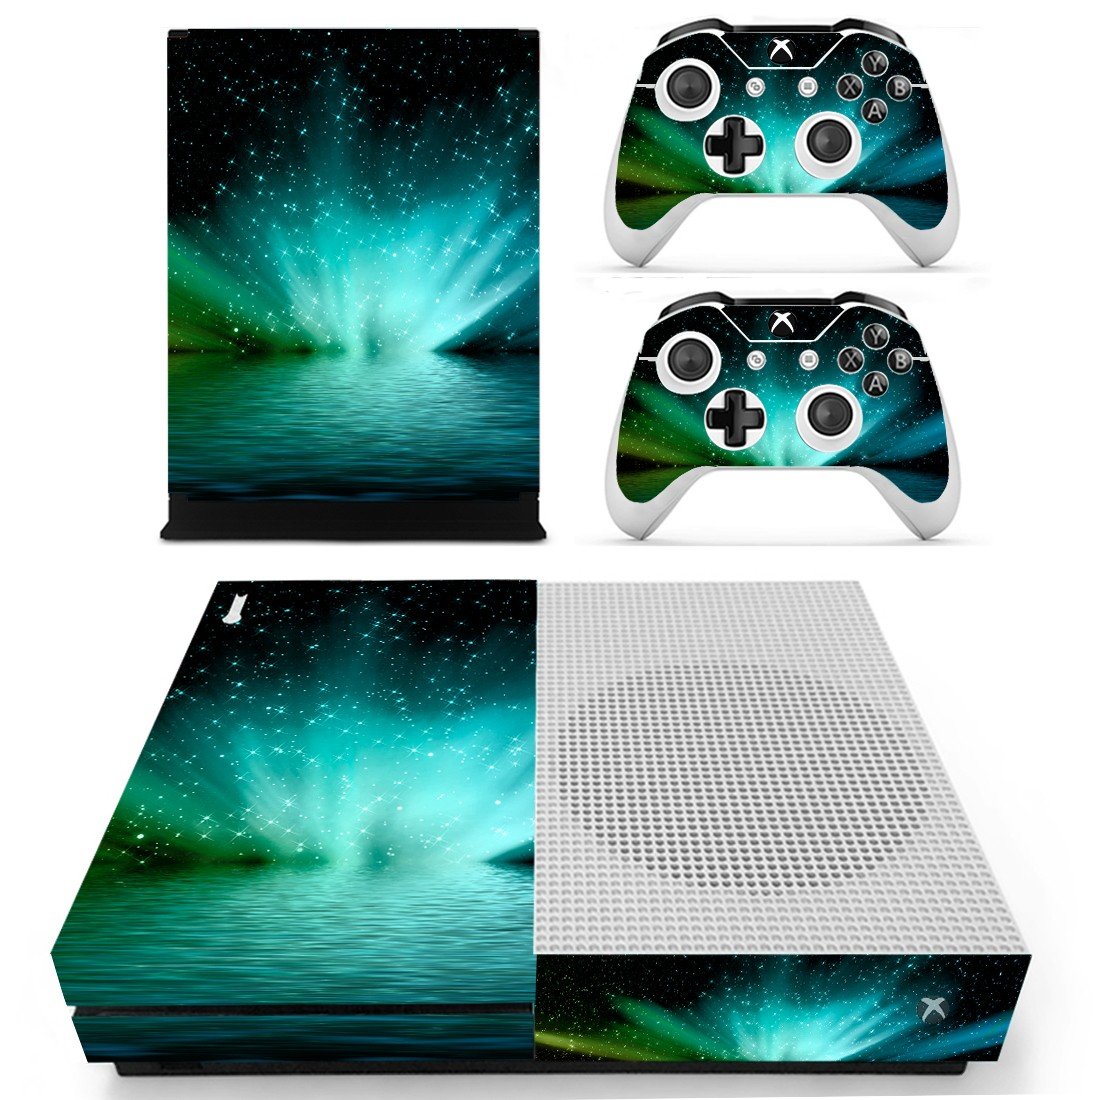 Shining Water Cover For Xbox One S